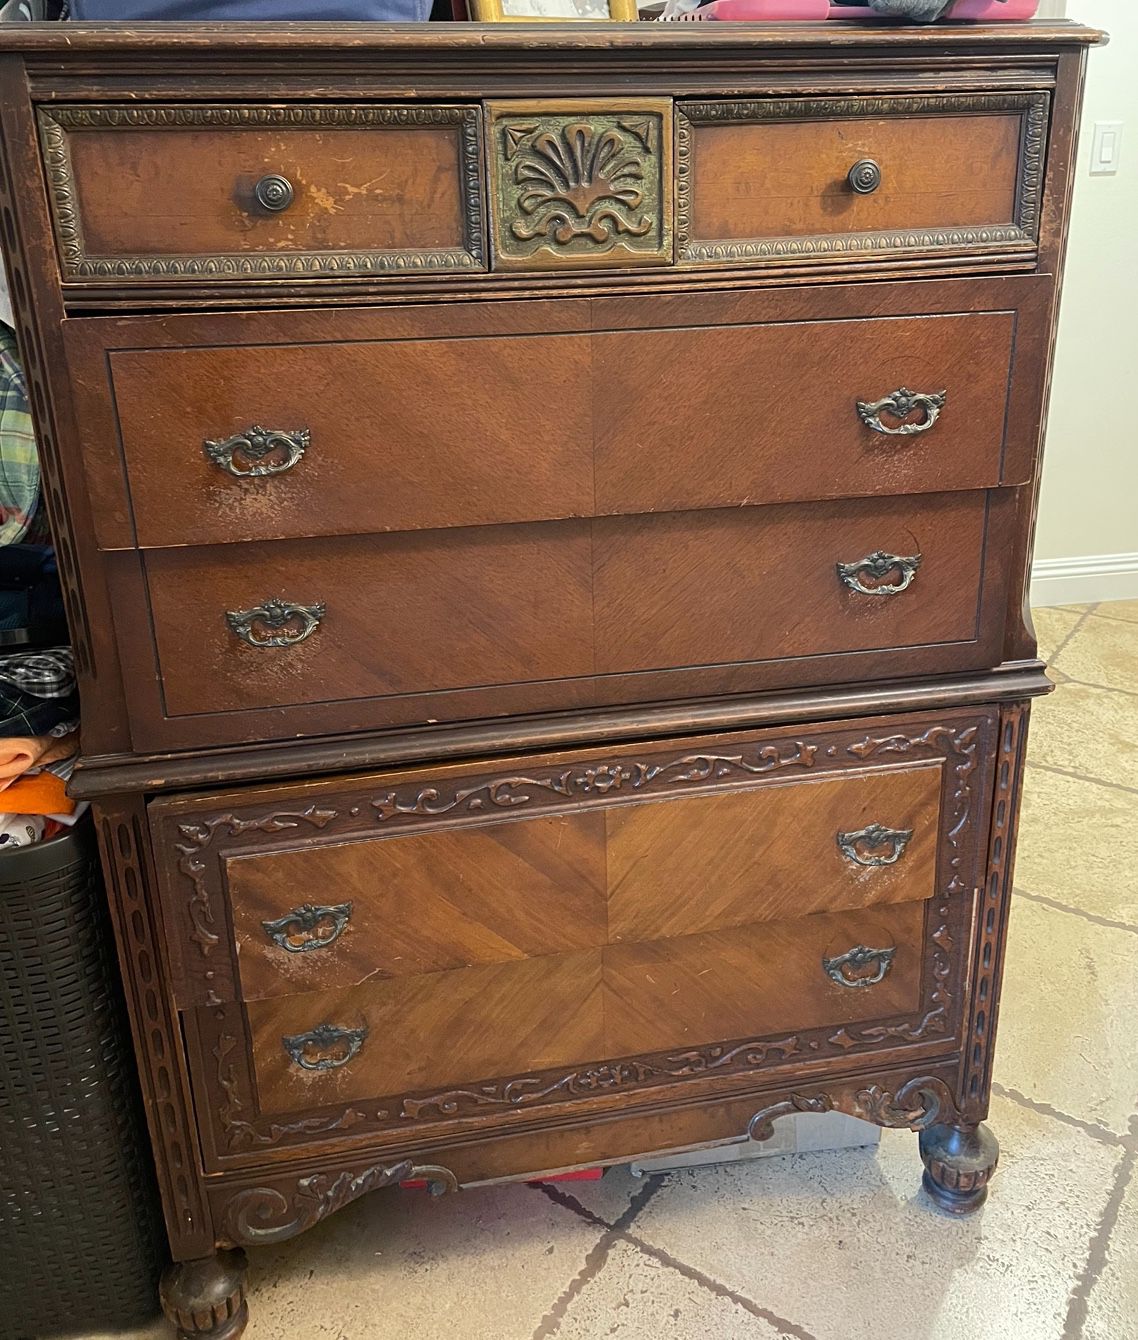 3 antique 6 Drawer Dresser, Retro Chest of Drawers with Metal Handle, Double Wood Dresser for Bedroom, classic $300 all 3 or $125 ea